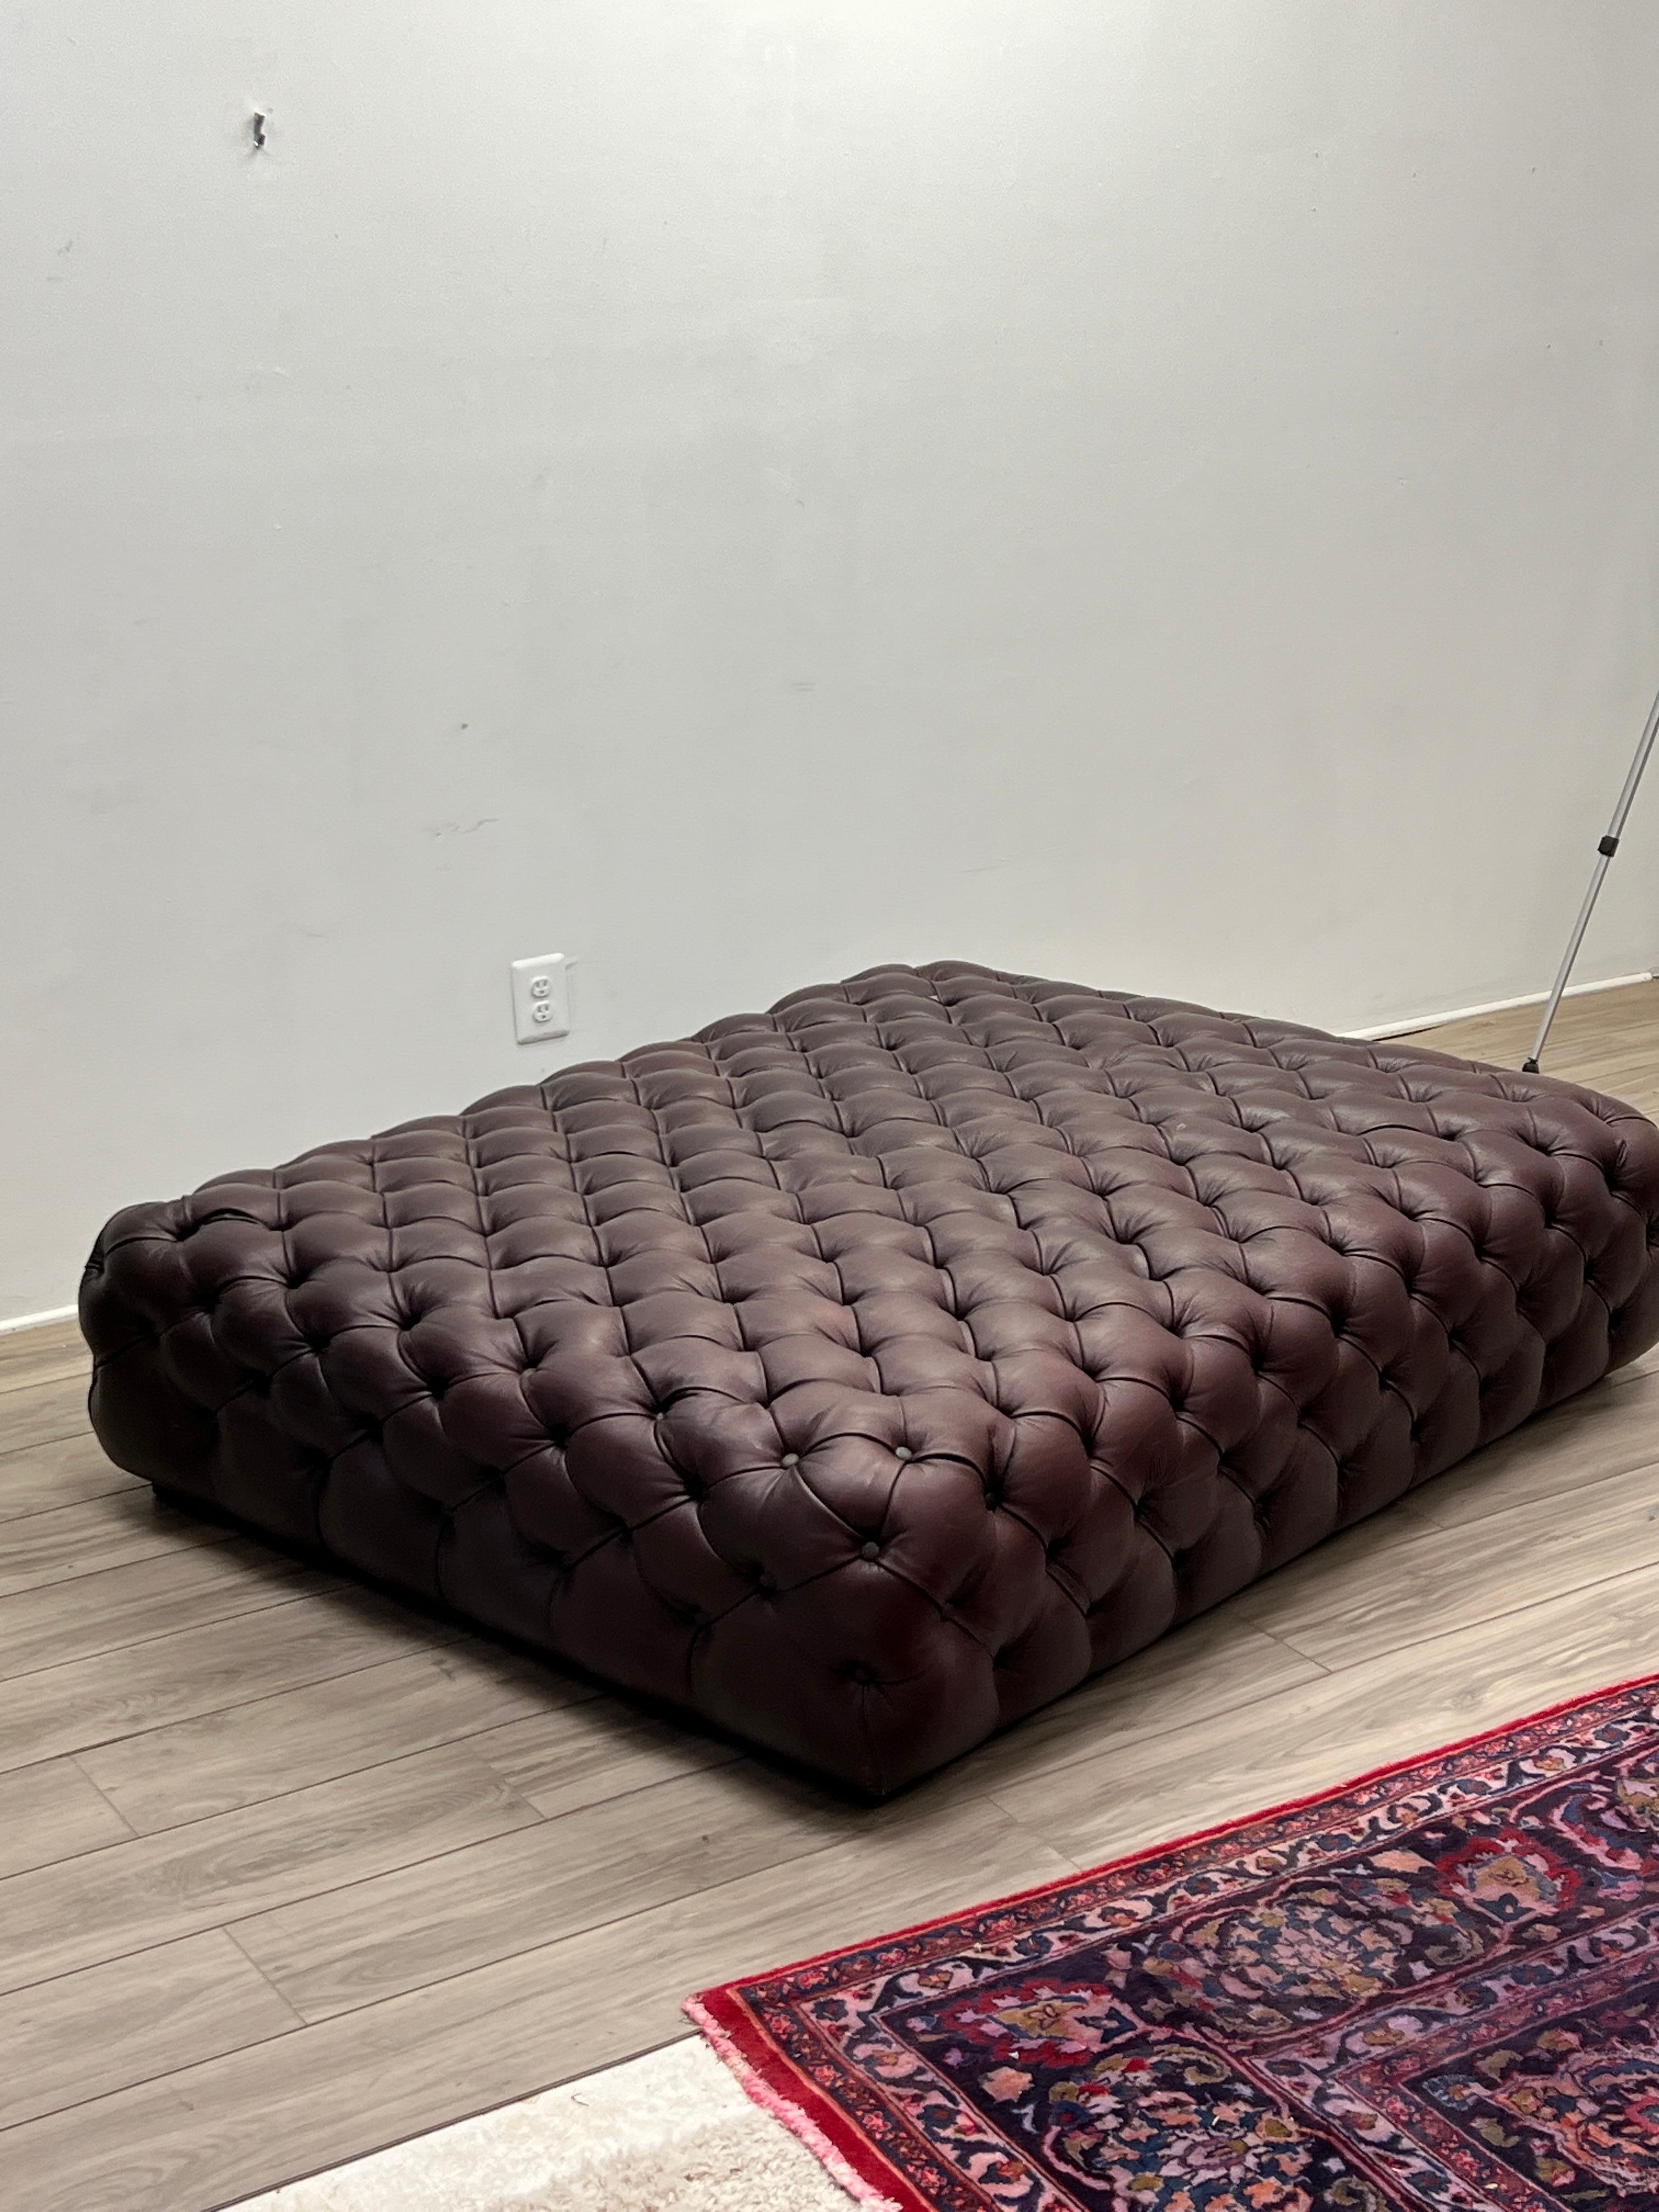 Featuring a unique and stylish low profile oversized Chesterfield ottoman with supple Burgundy leather. A well made and comfortable ottoman in good condition. All of the buttons are tight and intact. The rich leather is in good condition with no